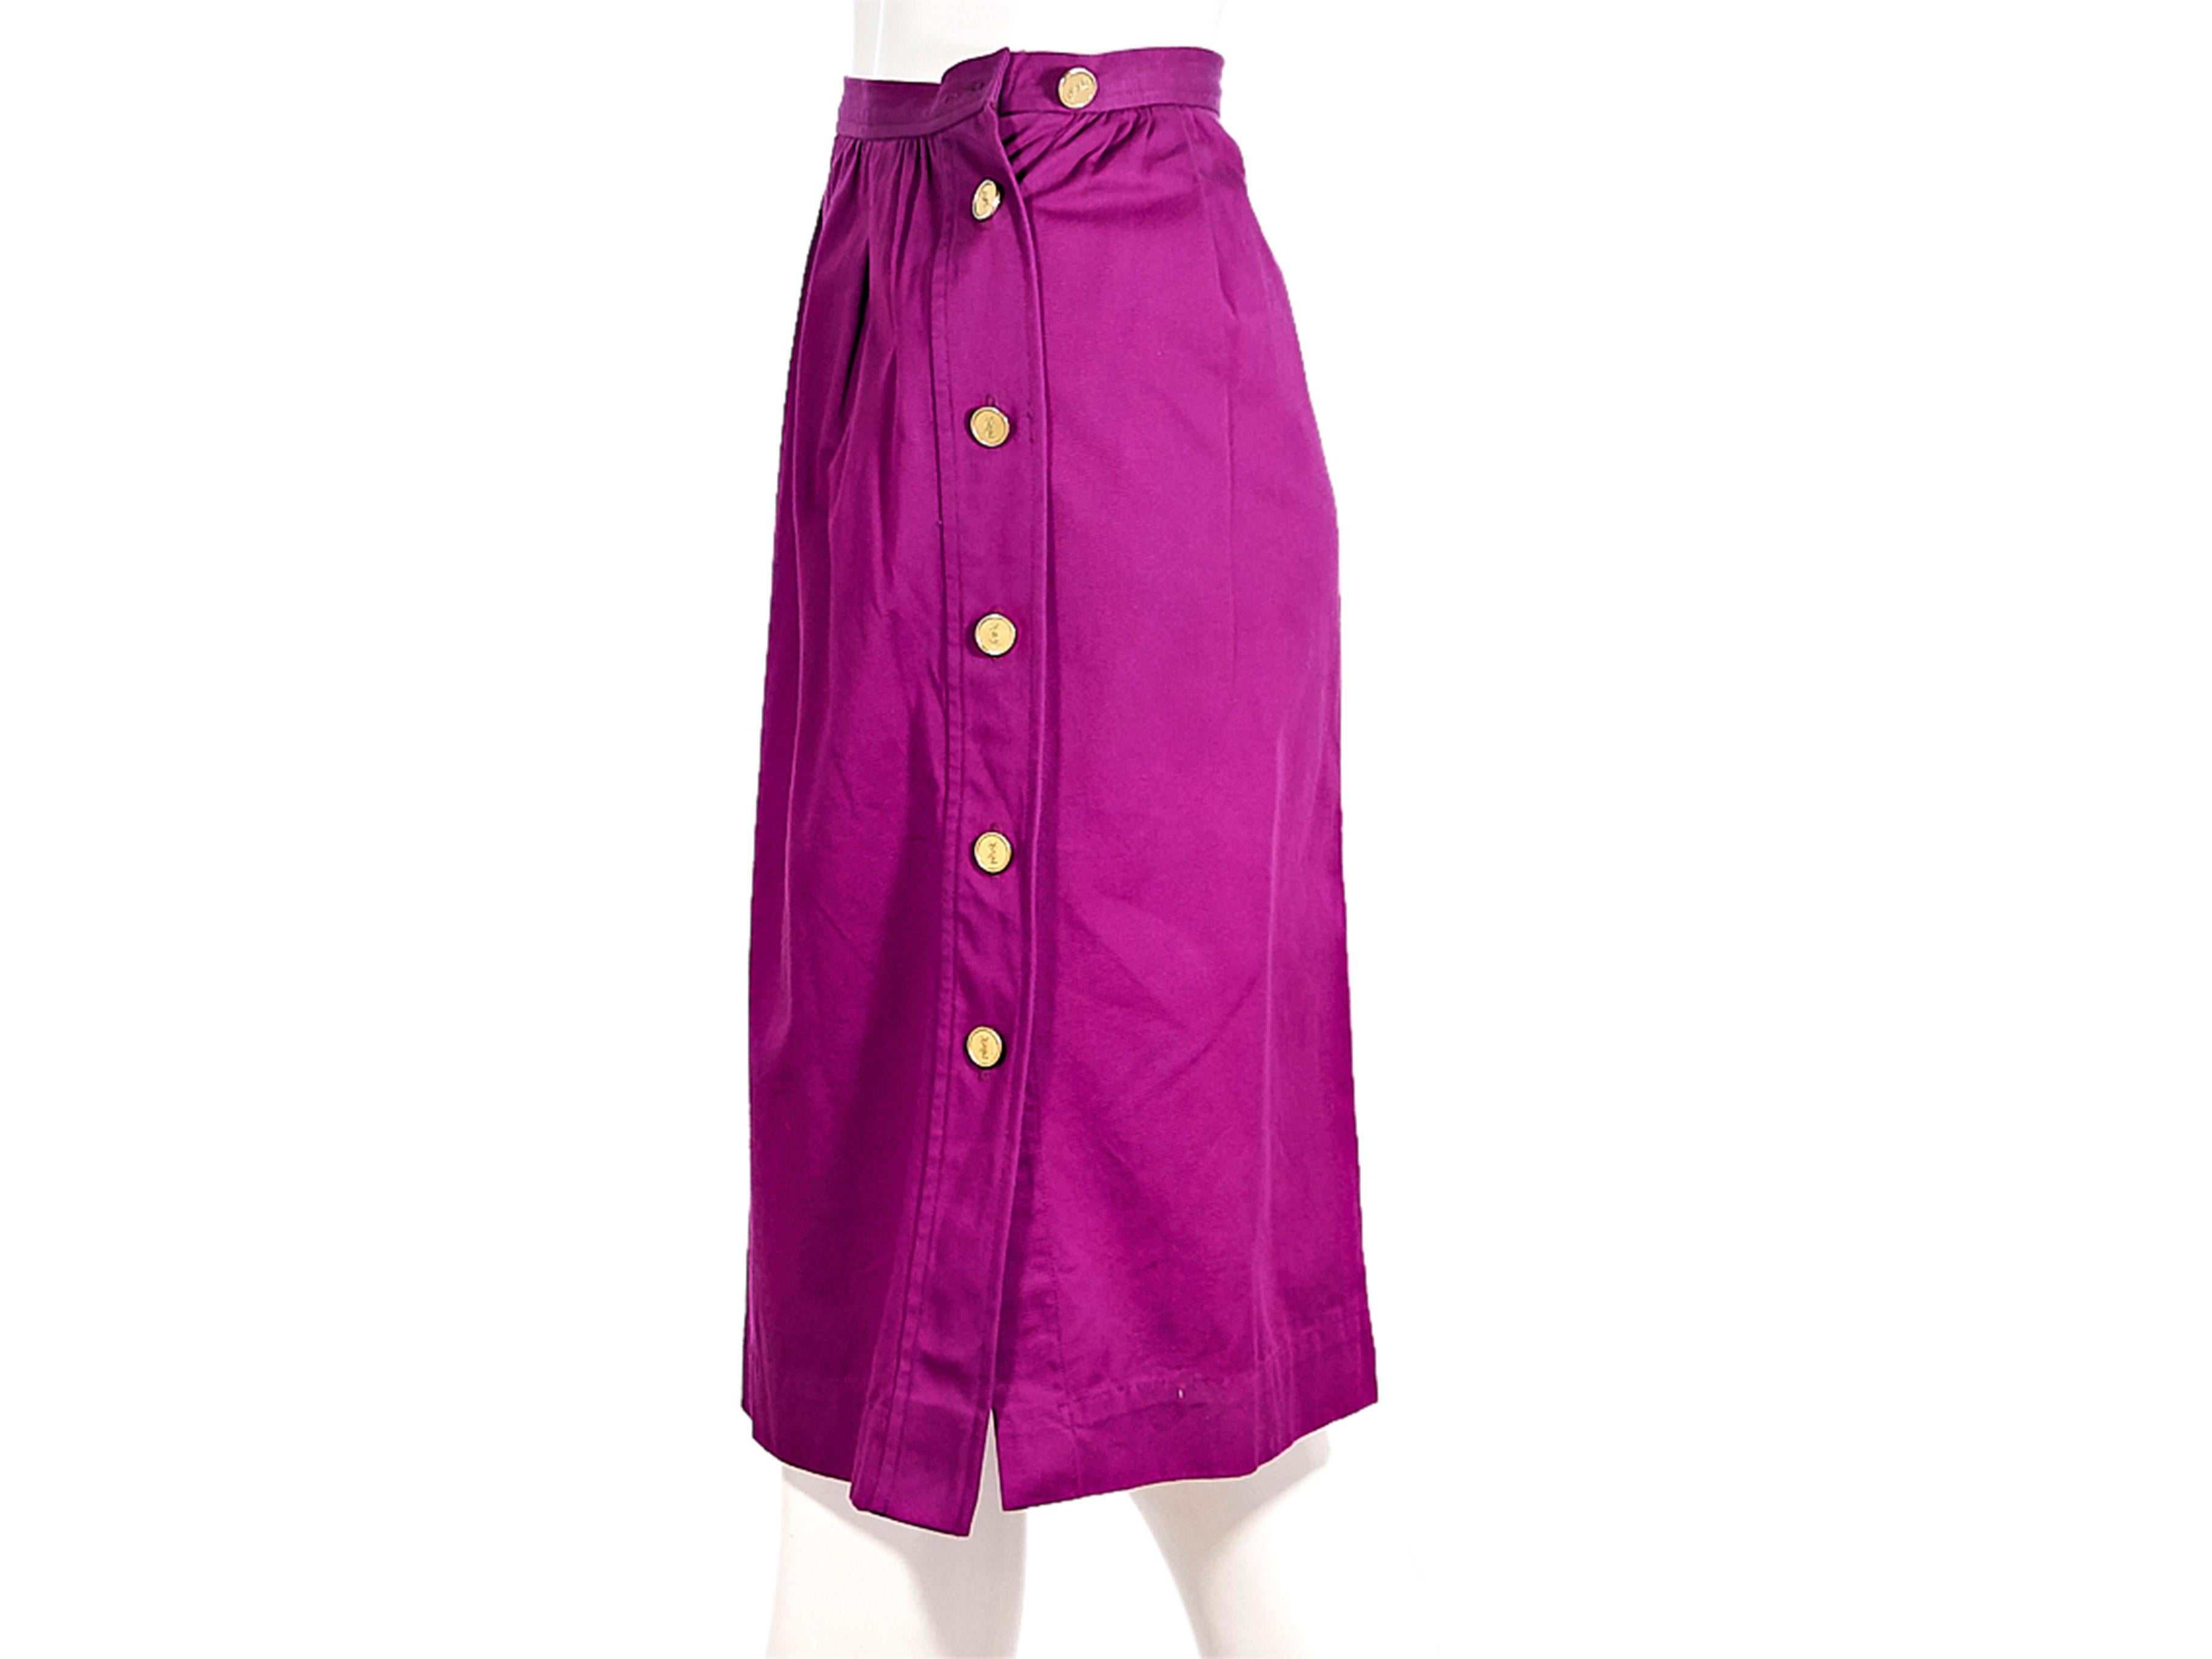 Product details:  Vintage purple high-waist skirt by Yves Saint Laurent. Knee-length. Gold-tone logo embossed button side closures. Style yours with a floral-patterned blazer. Label size FR 36. 25.5